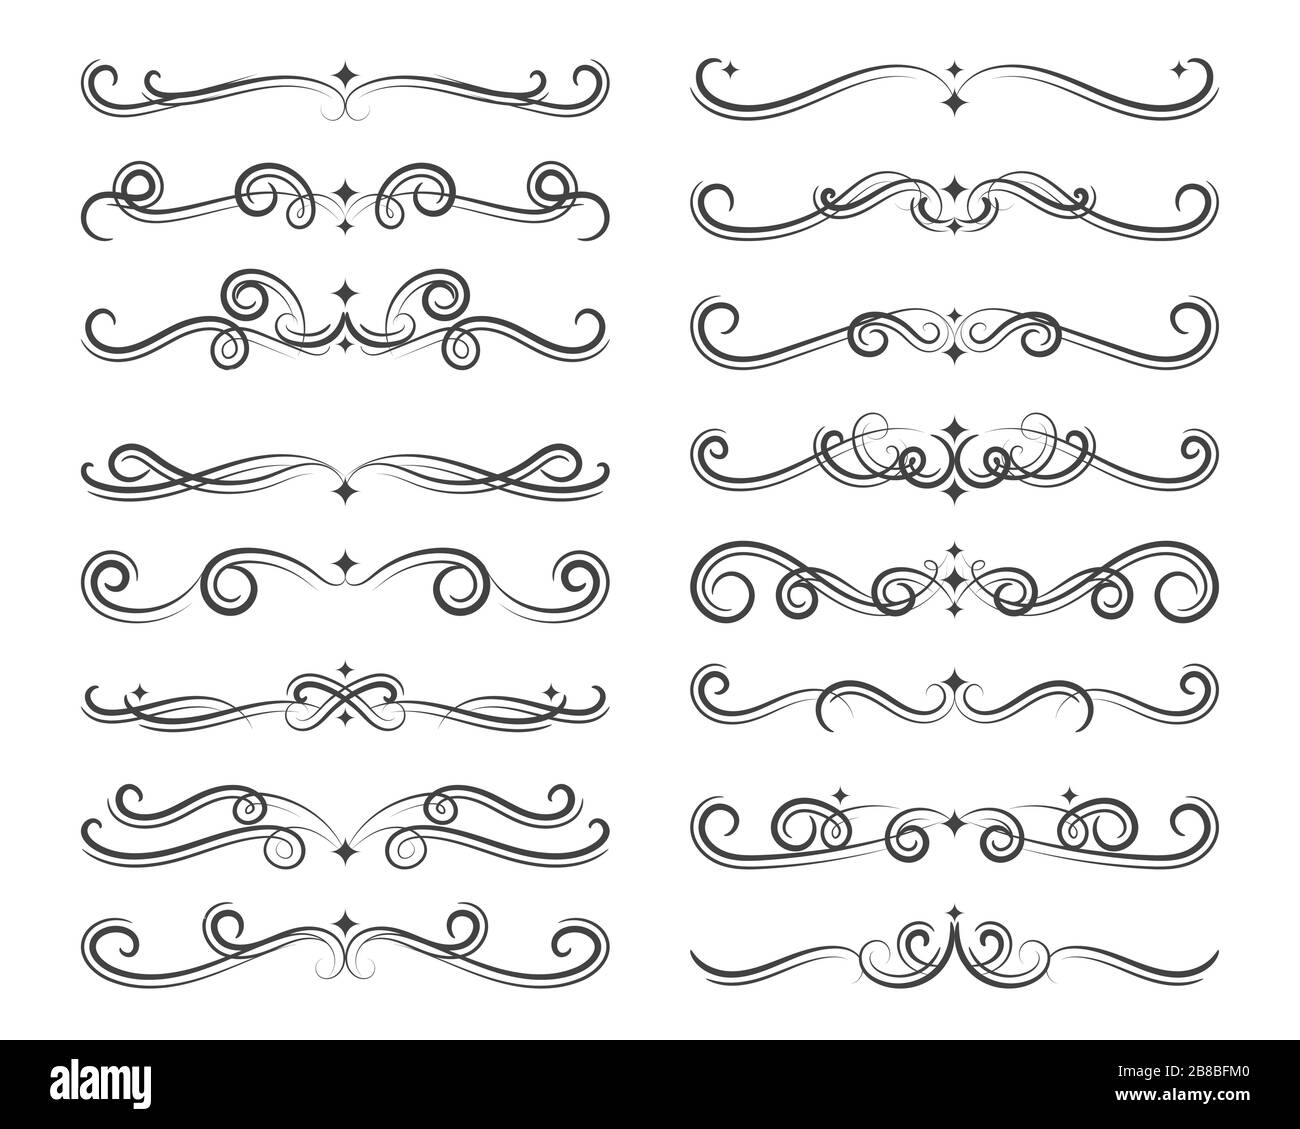 Set of Retro Ornate Vintage Page Dividers and Decor Lines. Vector illustration. Stock Vector